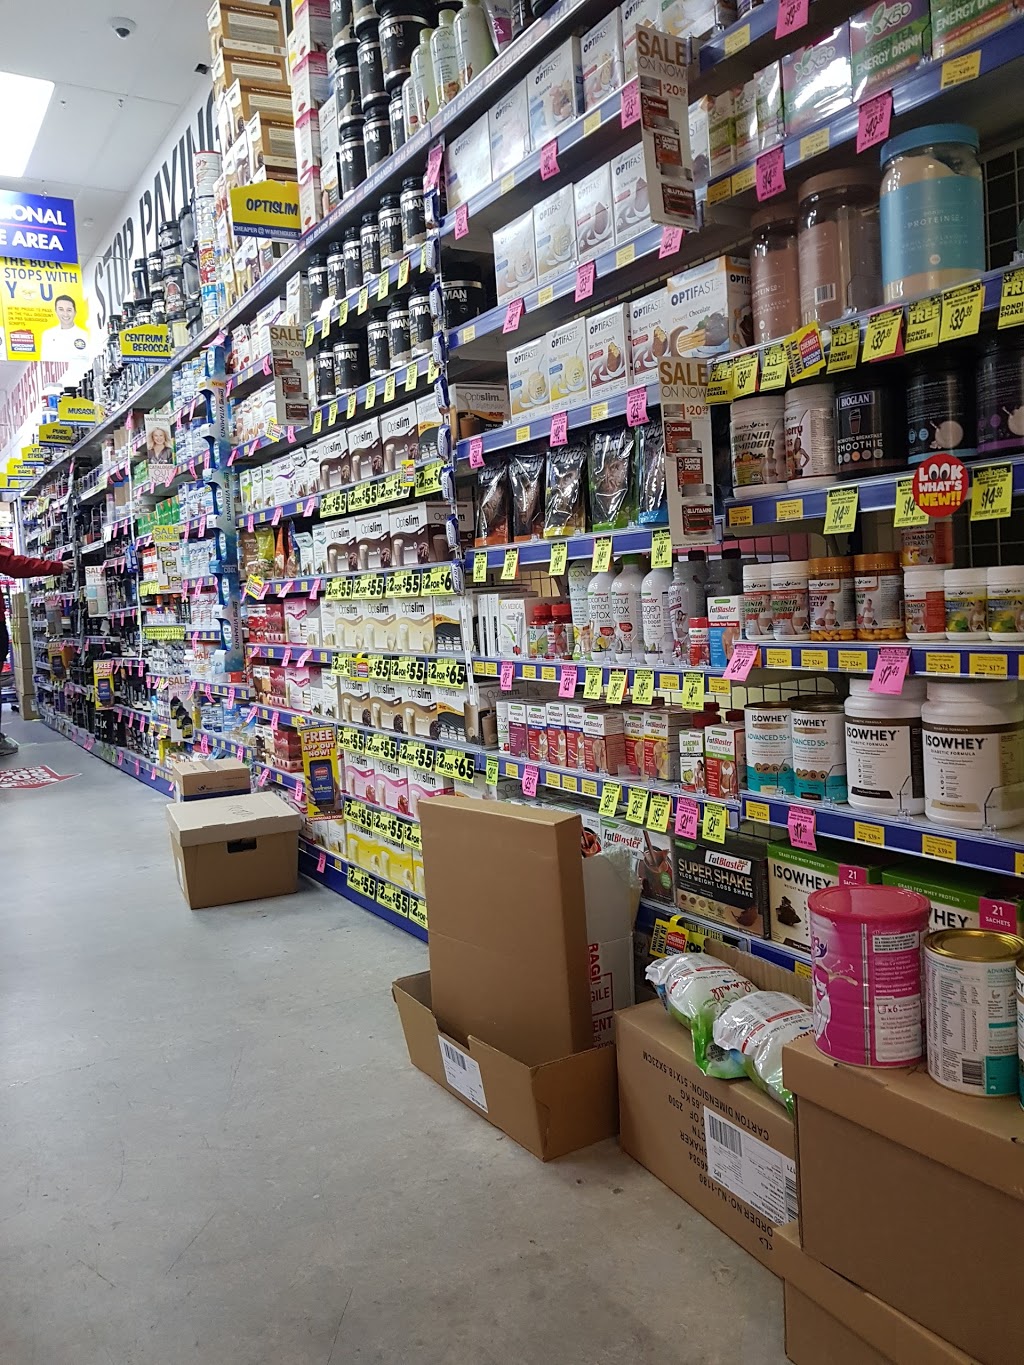 Chemist Warehouse Beaumont Hills | clothing store | Shop 11-12 Beaumont Shopping Centre, 70 The Pkwy, Beaumont Hills NSW 2155, Australia | 0296726555 OR +61 2 9672 6555